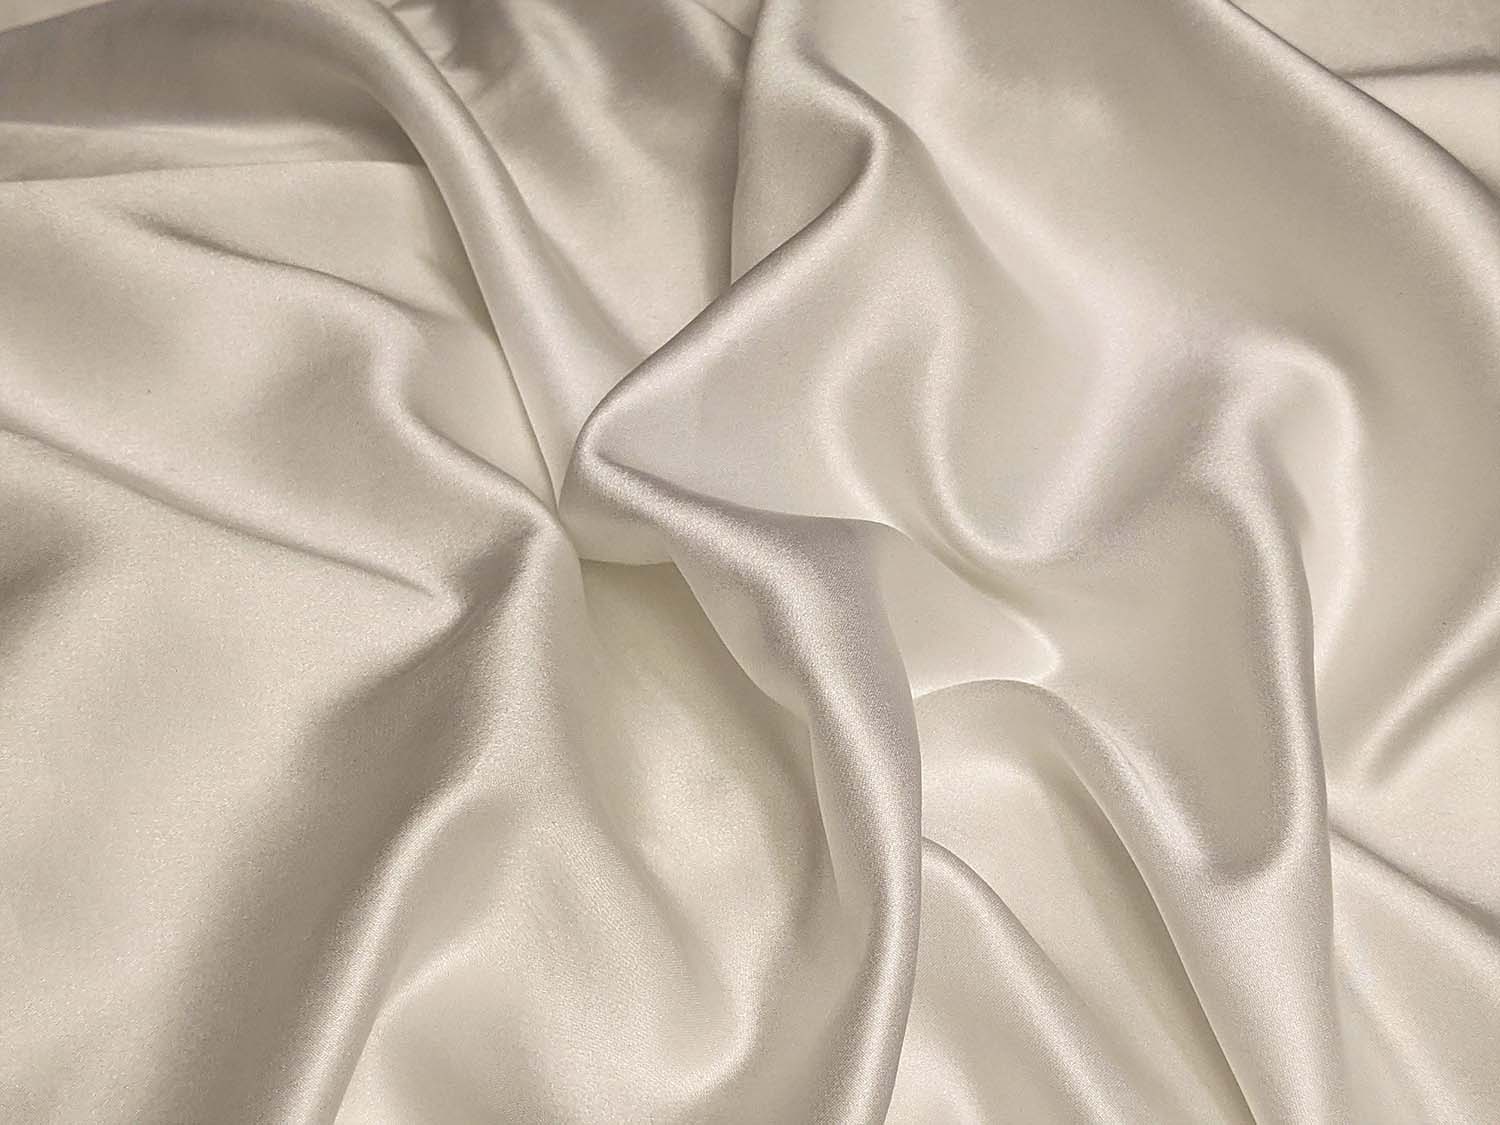 Nature and Science have joined forces to produce a silk garment